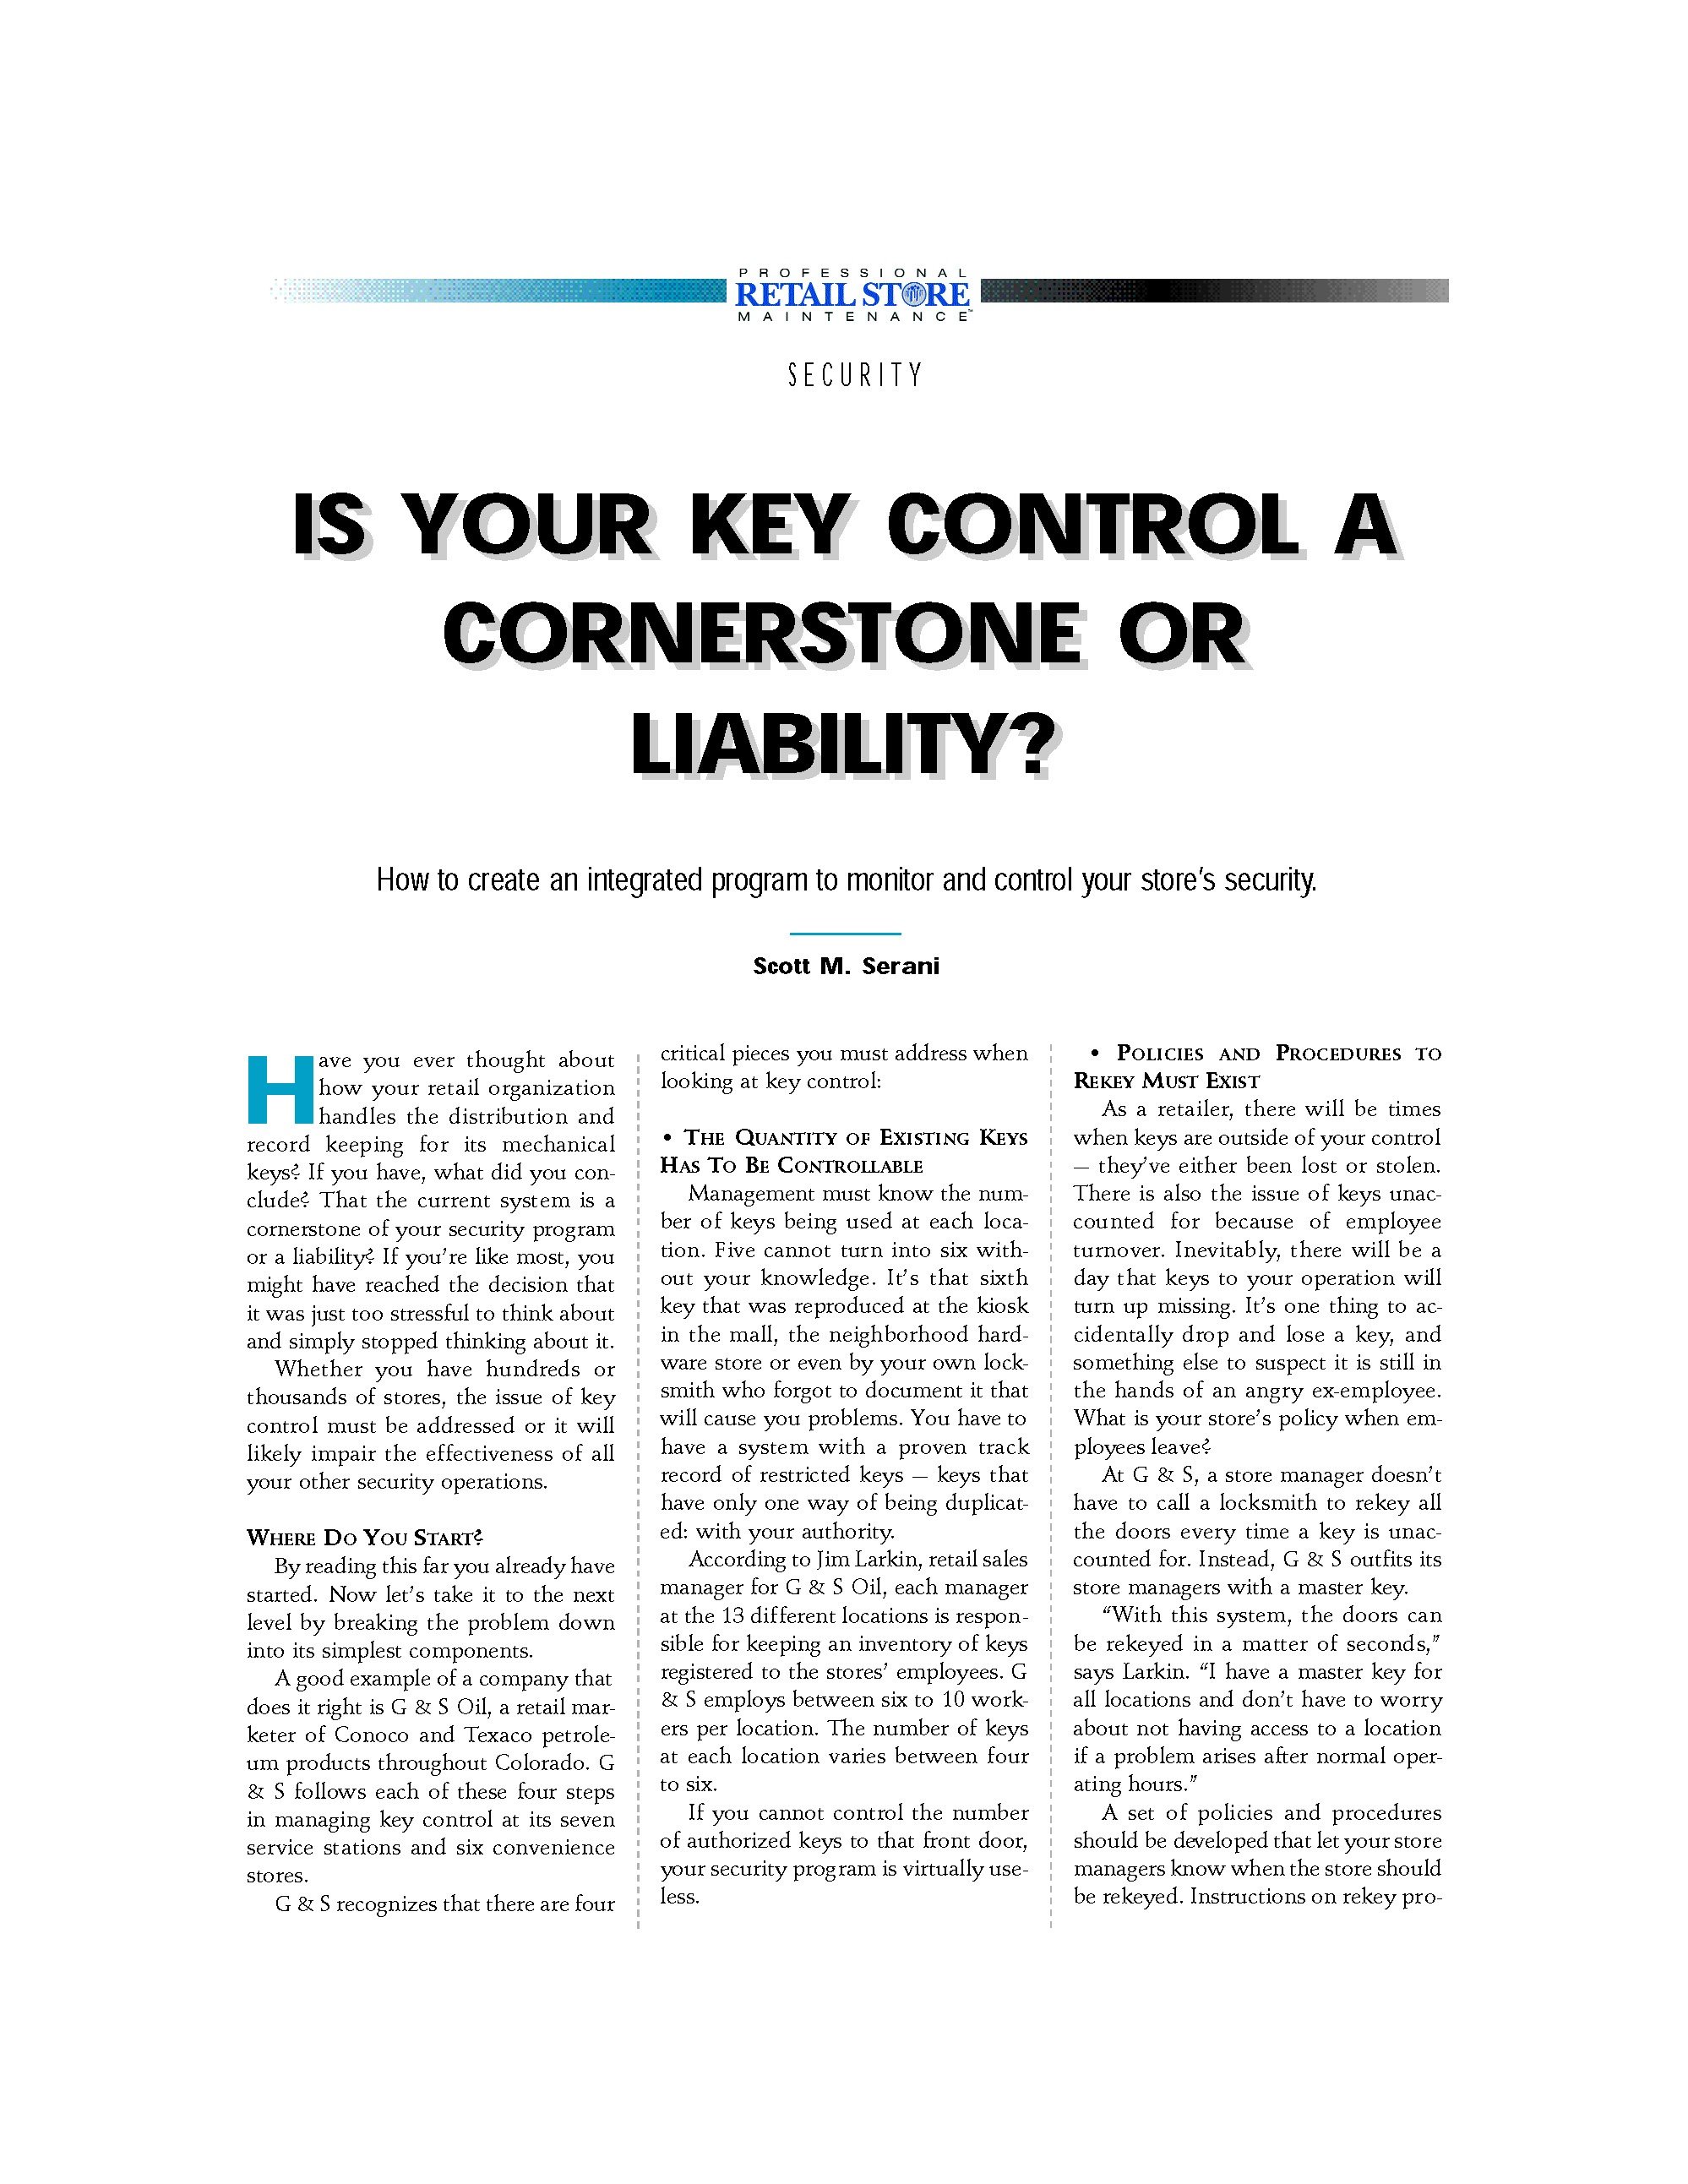 Is Your Key Control a Cornerstone or a Liability?